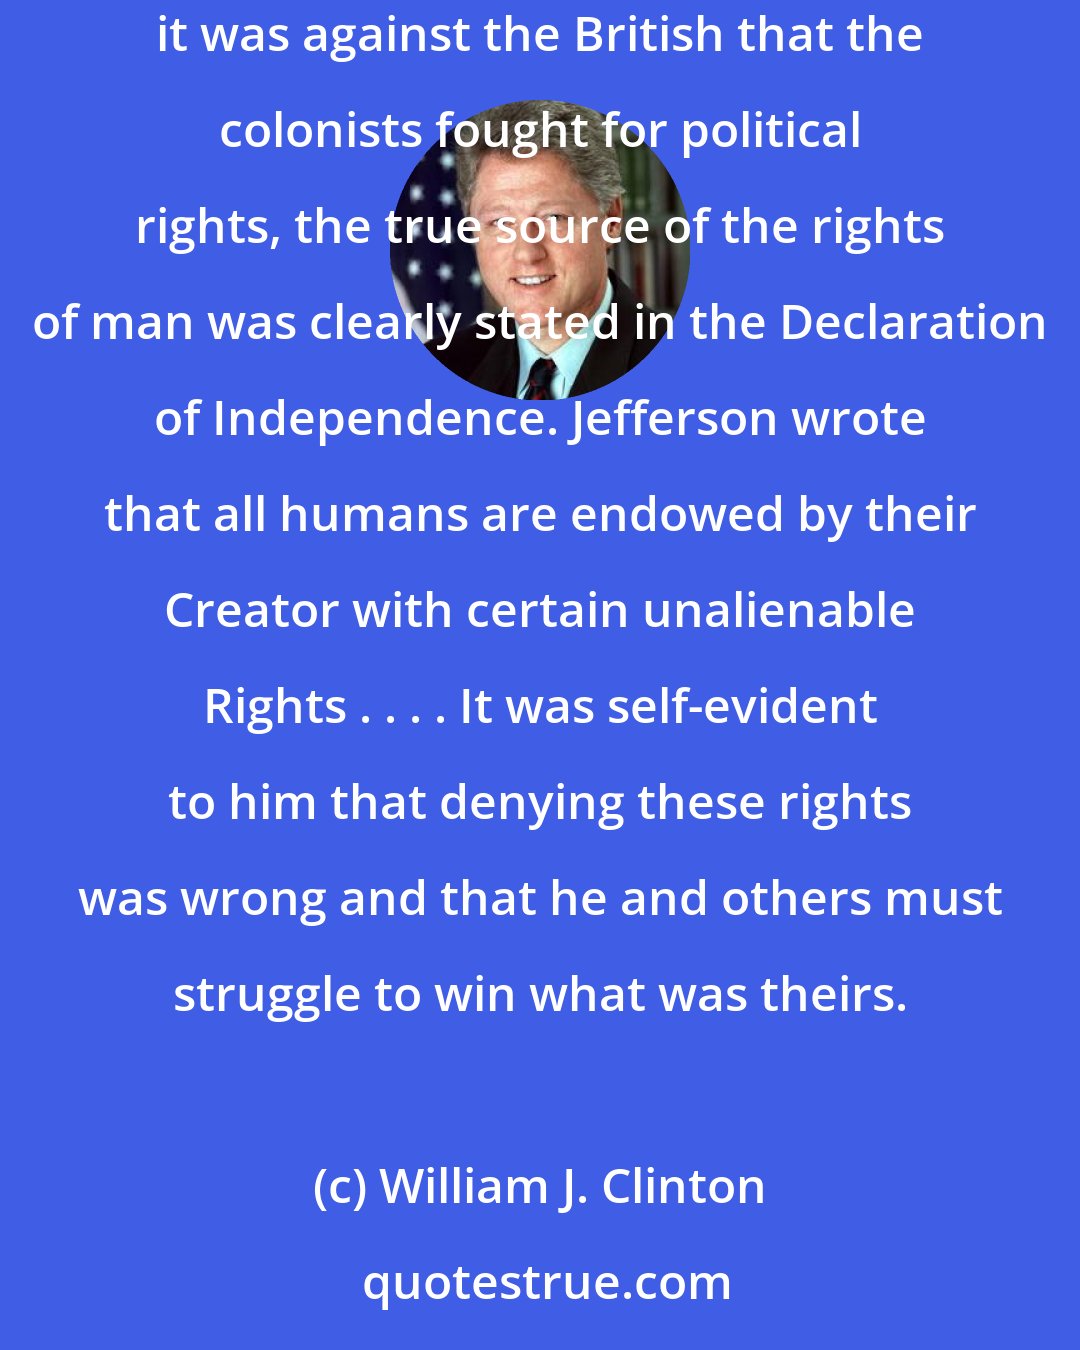 William J. Clinton: Thomas Jefferson understood the greater purpose of the liberty that our Founding Fathers sought during the creation of our Nation. Although it was against the British that the colonists fought for political rights, the true source of the rights of man was clearly stated in the Declaration of Independence. Jefferson wrote that all humans are endowed by their Creator with certain unalienable Rights . . . . It was self-evident to him that denying these rights was wrong and that he and others must struggle to win what was theirs.